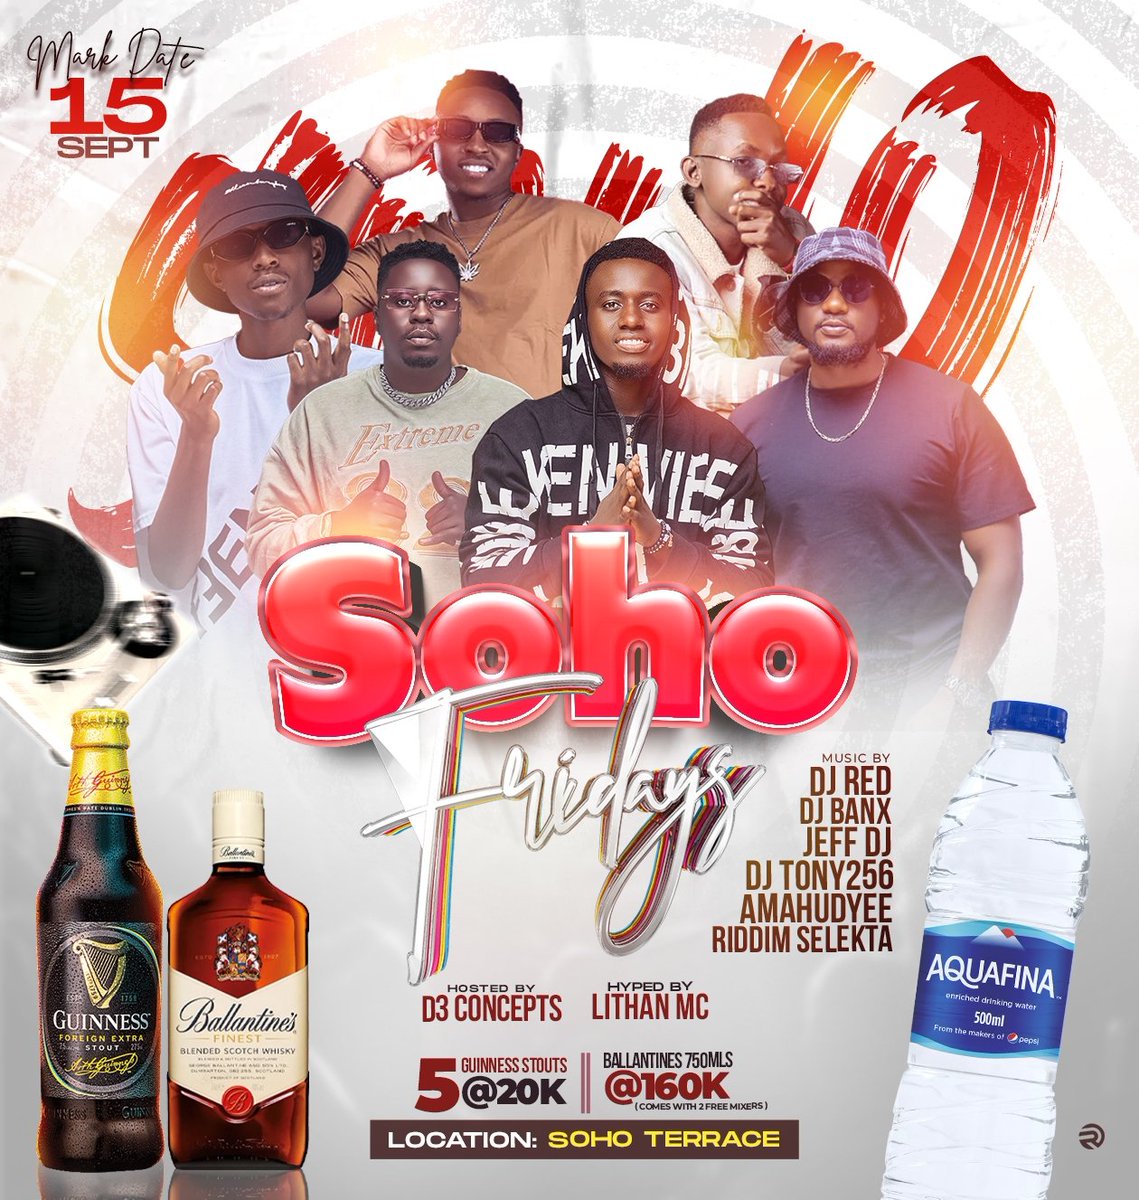 Tomorrow, Tomorrow 
Here is the best Friday Plot in Mbarara 🔥 

#SoHoFridays at SoHo Terrace, with @Lithan_Mc1 , @banx_dj, @JeffDJtheguy, @DeRiddimselekta, @DjRed, @Amahudyee & @Deej_Tony256 

Hosted by @d3concepts. 
Come through and vibe with friends